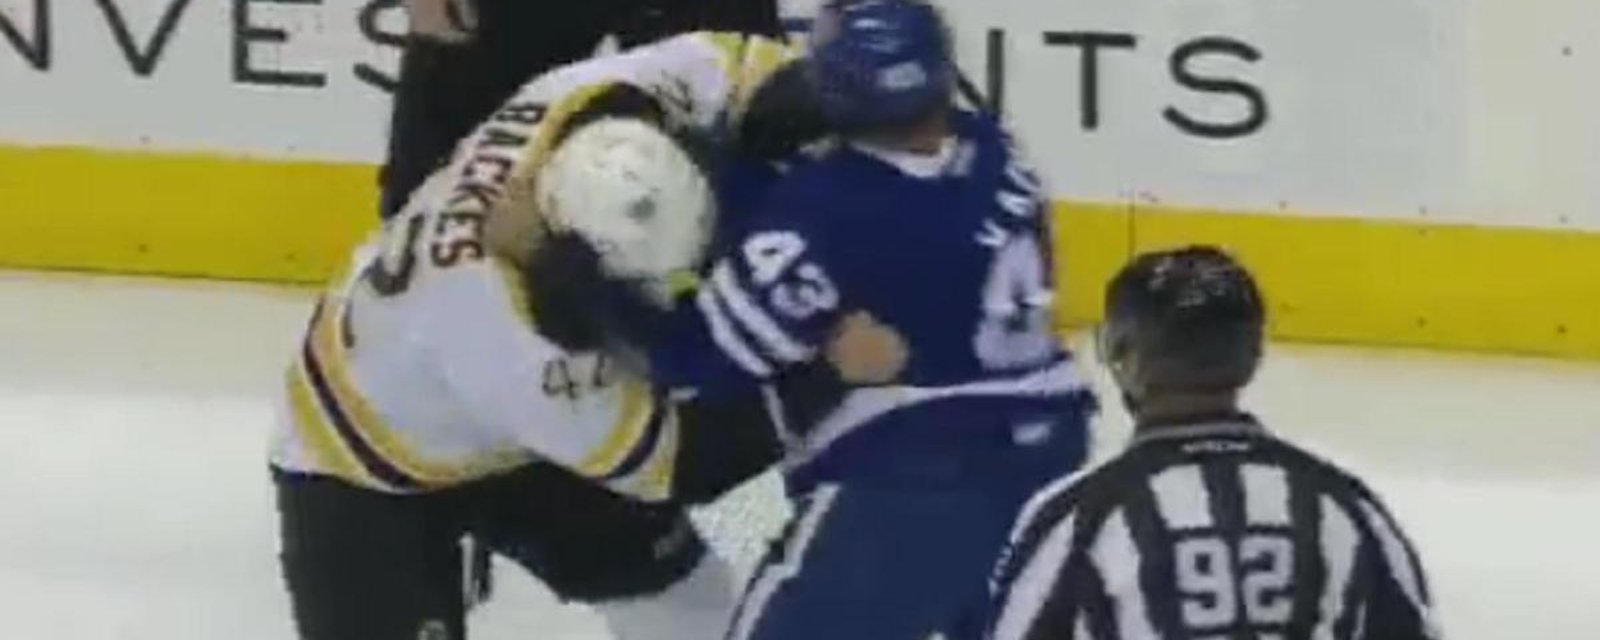 Watch: Kadri and Backes drop the gloves